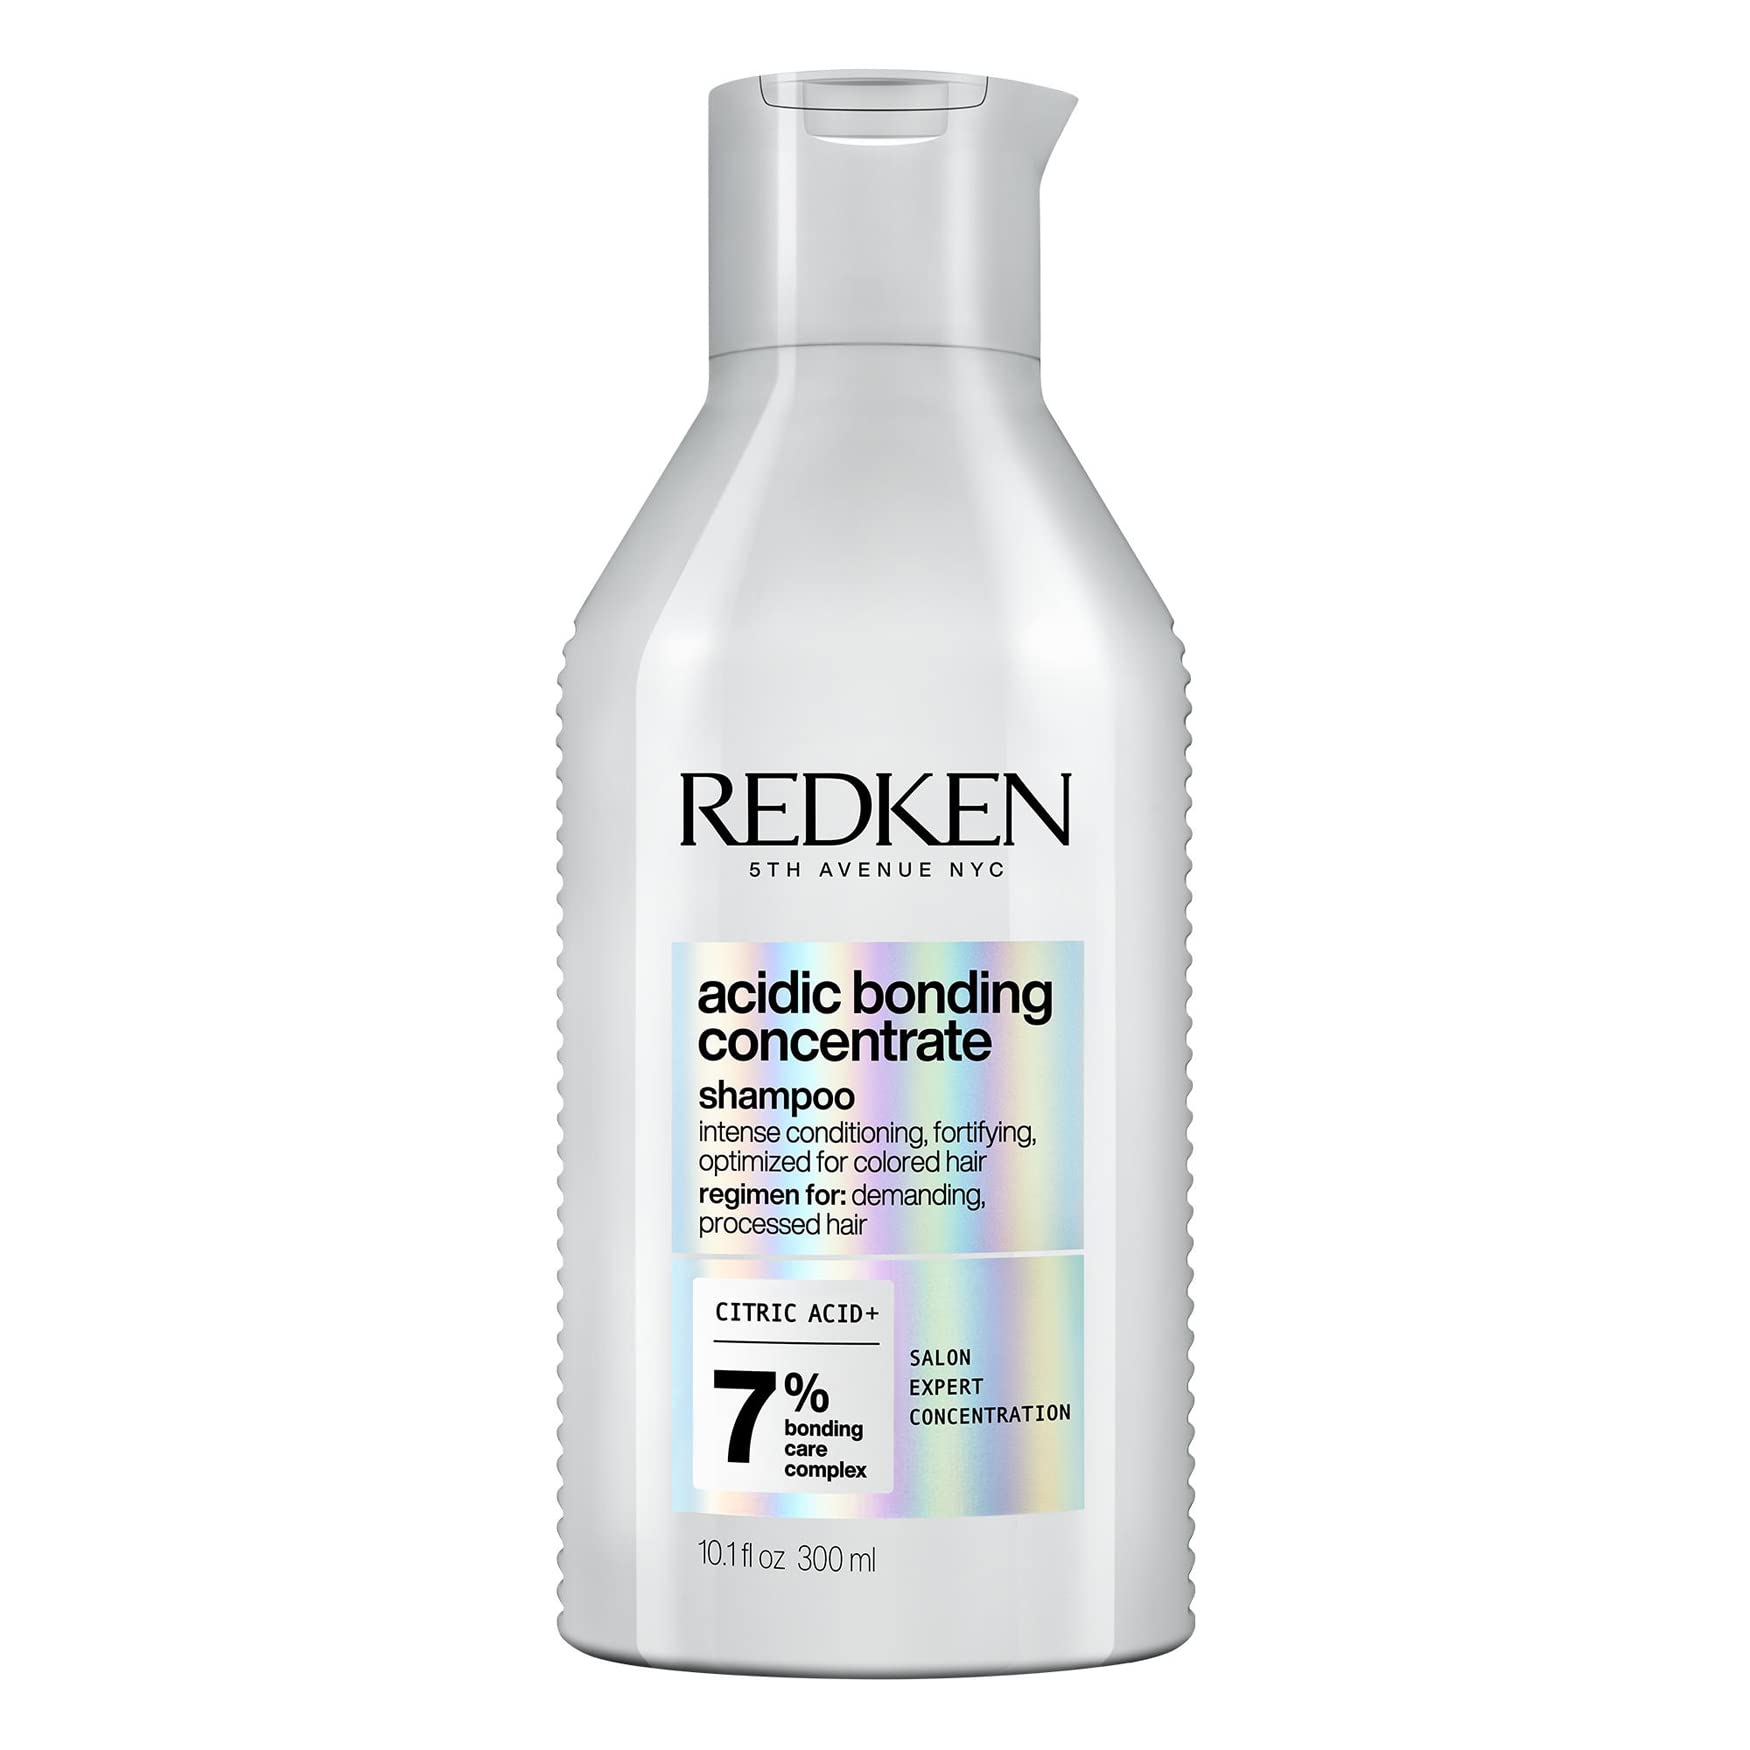 Redken | Shampoo, Repairs & Protects Colour-Treated Hair, Acidic Bonding Concentrate, 300 ml